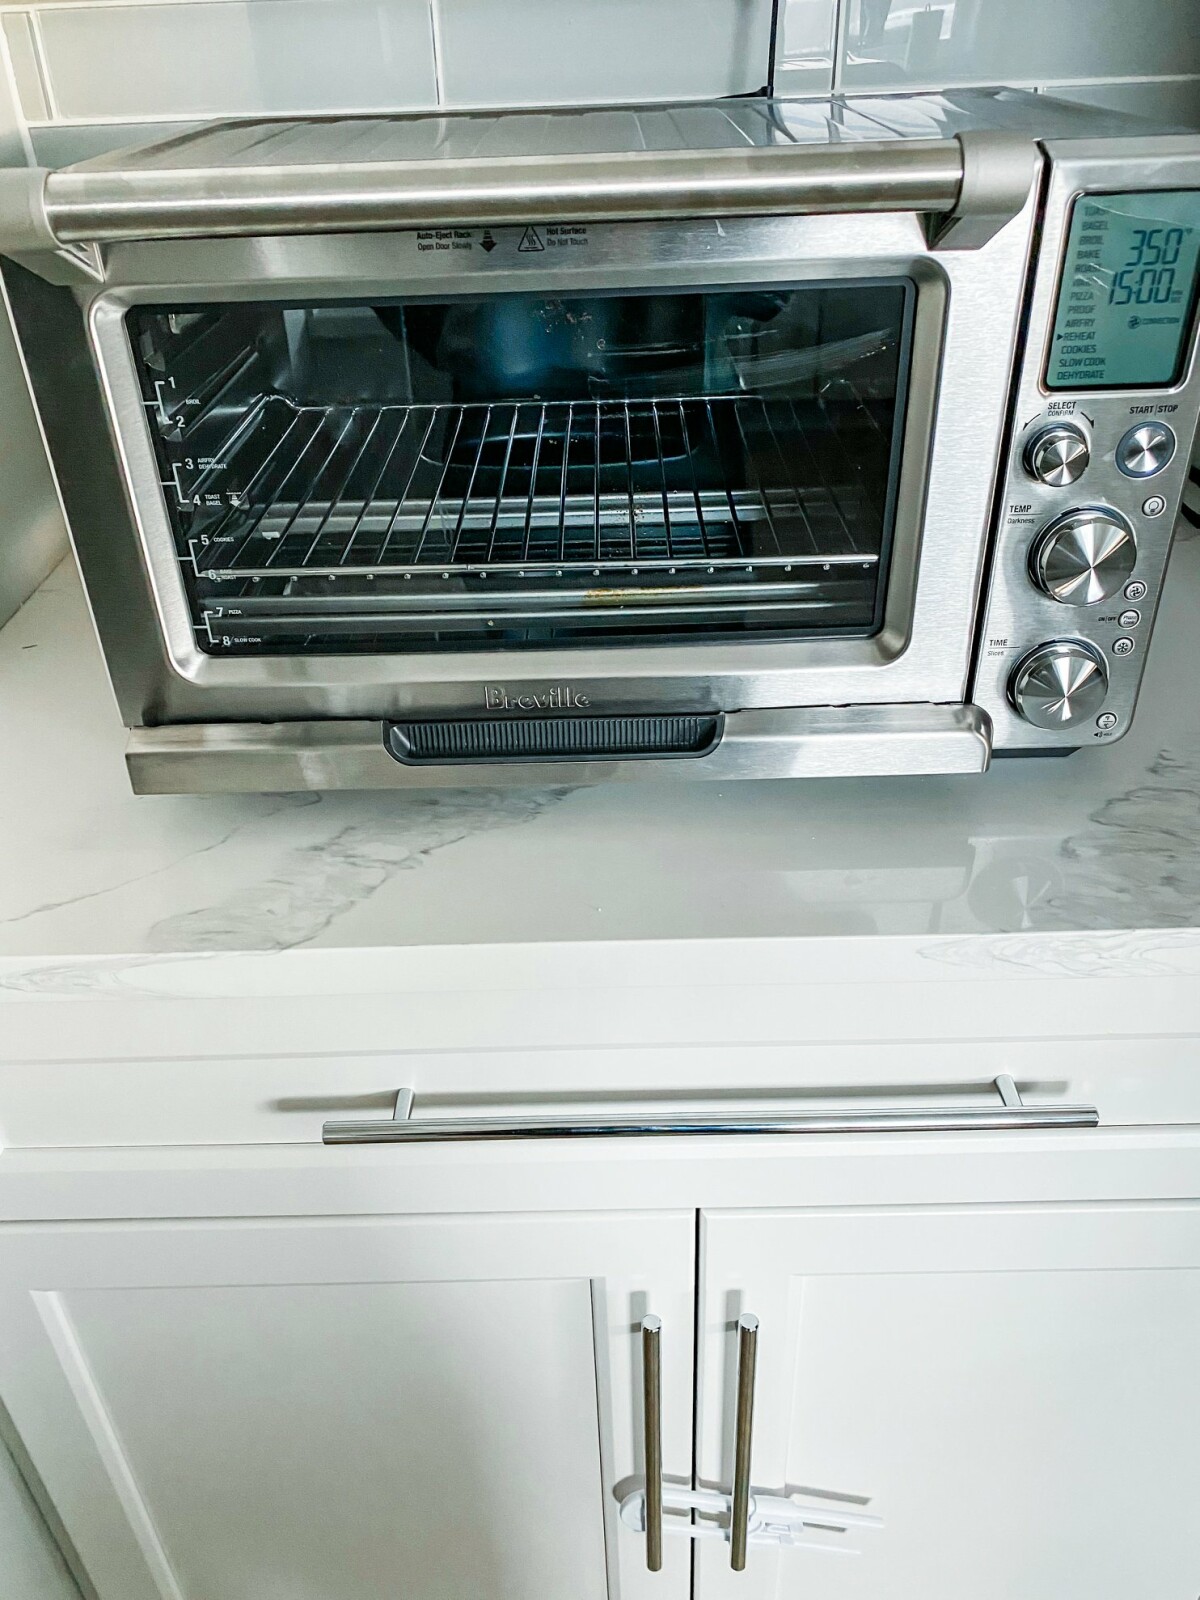 Is heating your food in a microwave safe?